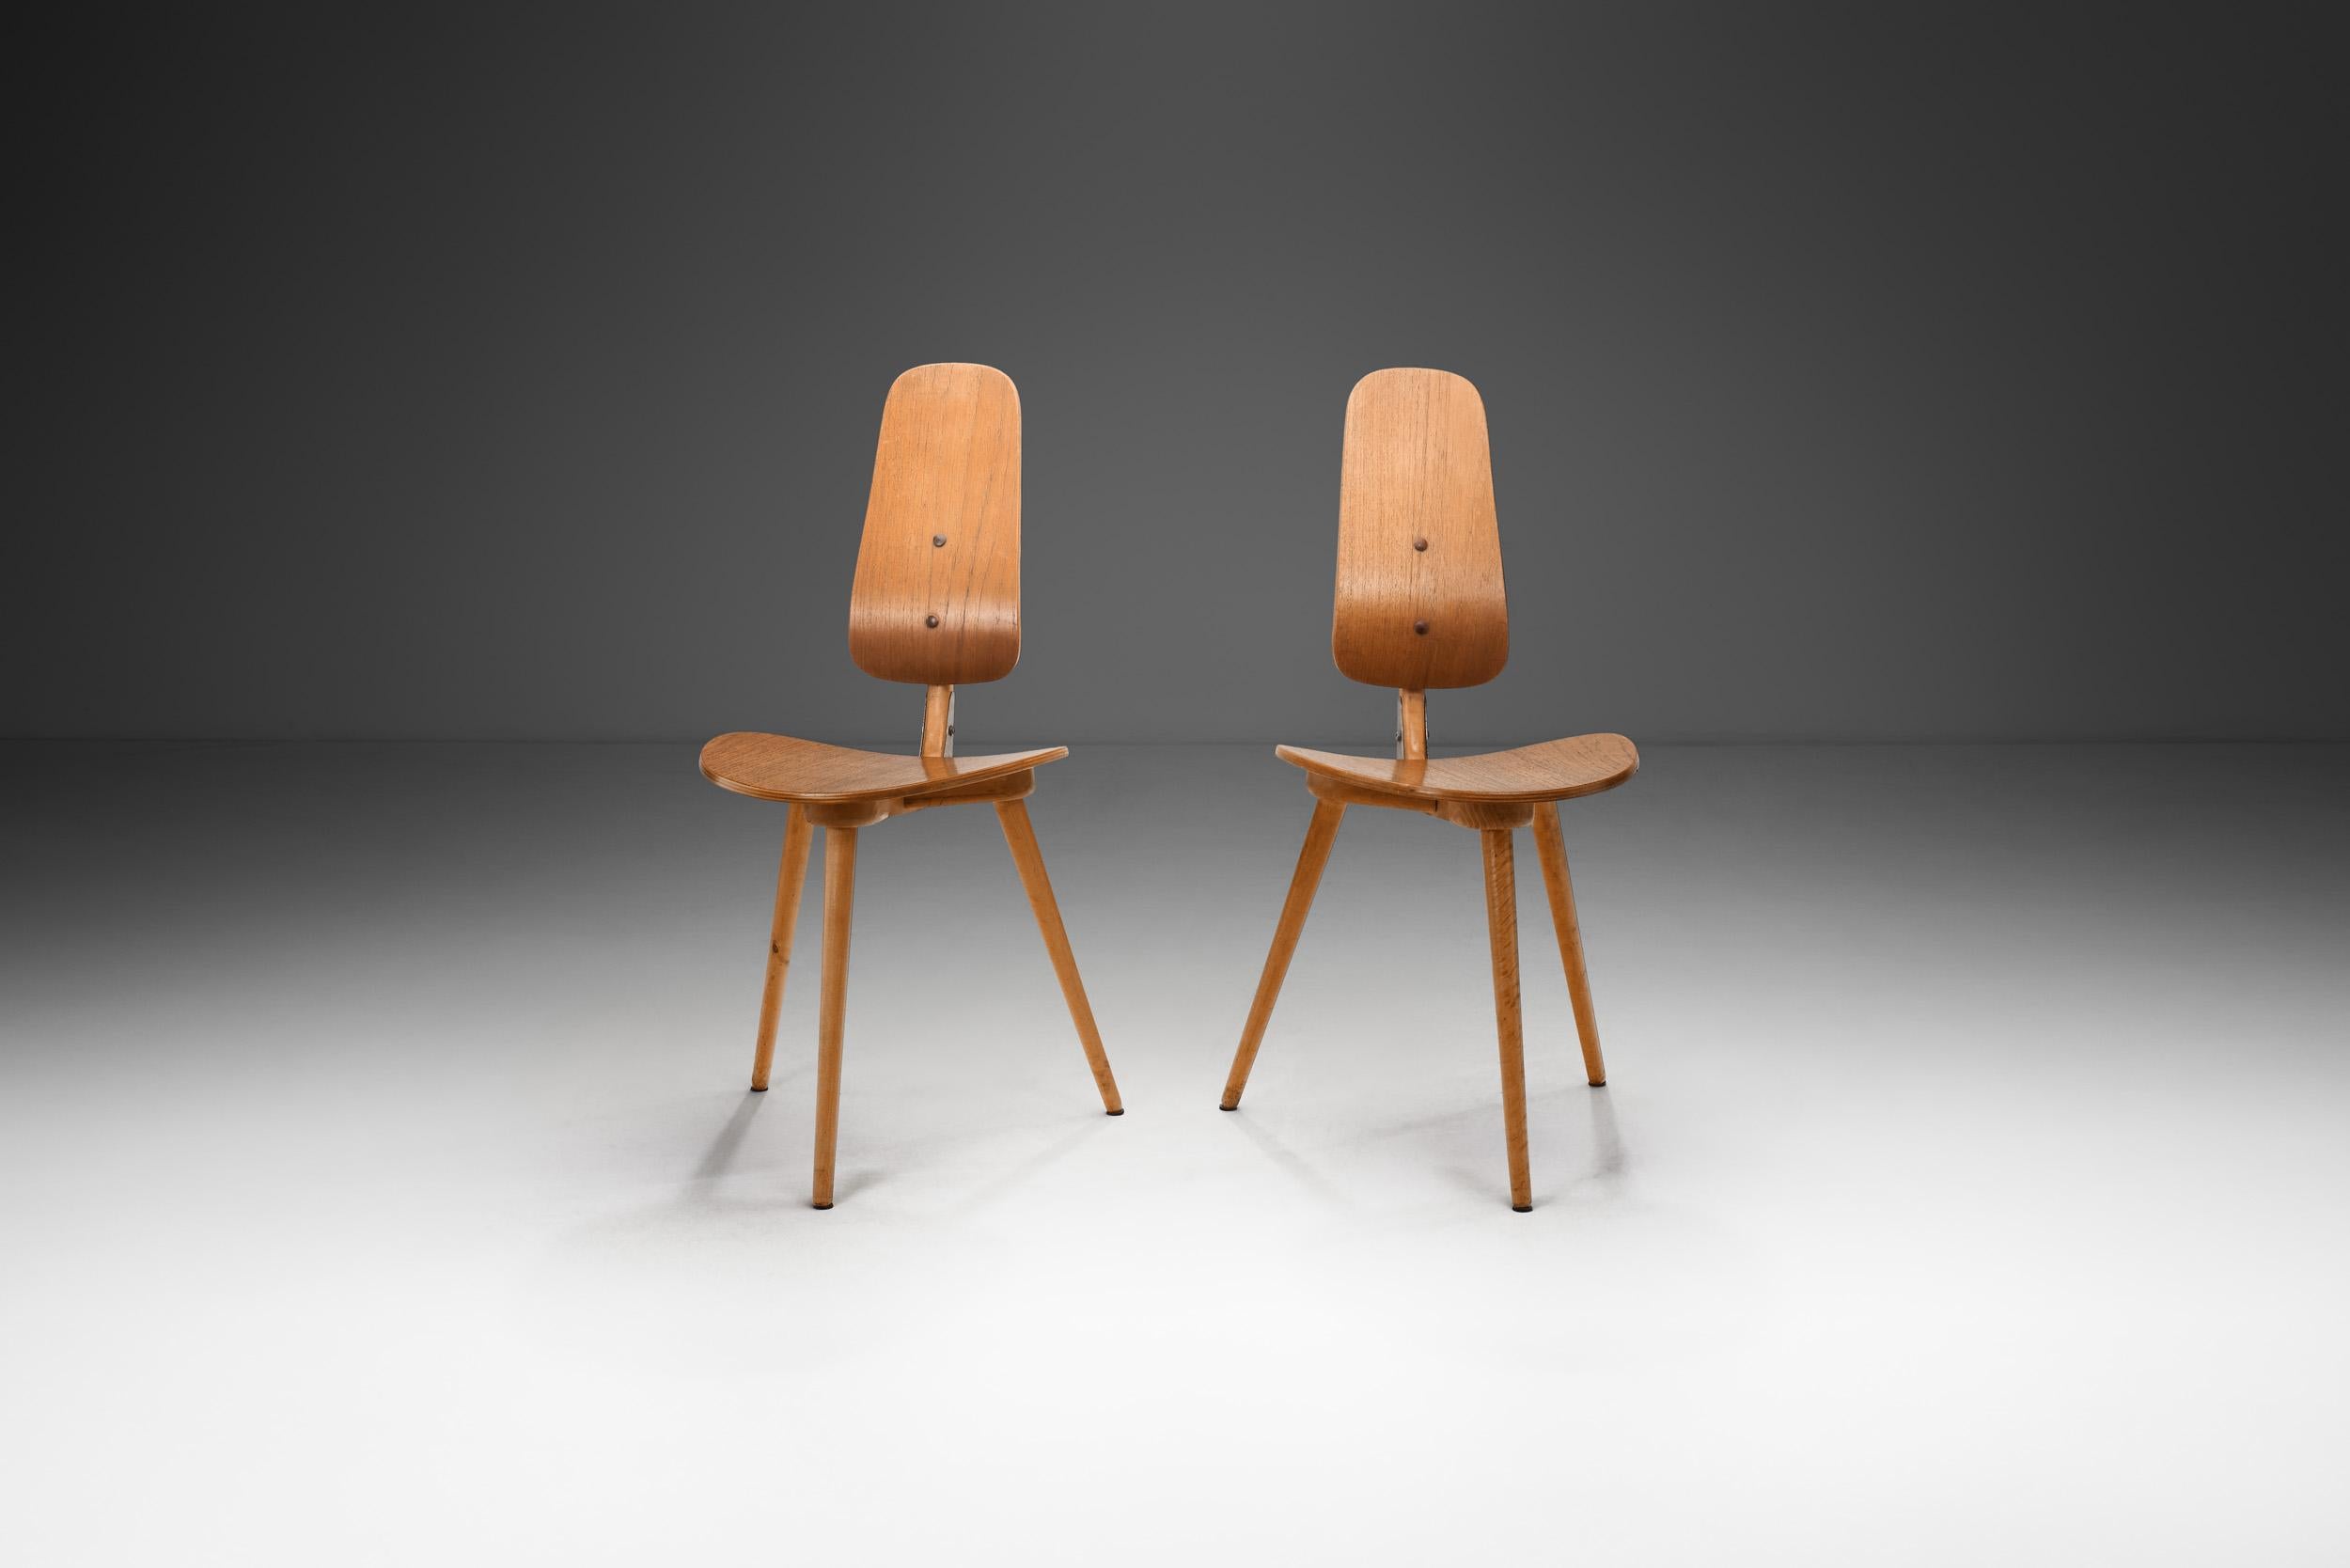 Mid-Century Modern Pair of “Grill” Chairs by Bengt Ruda for Ikea, Sweden 1958 For Sale